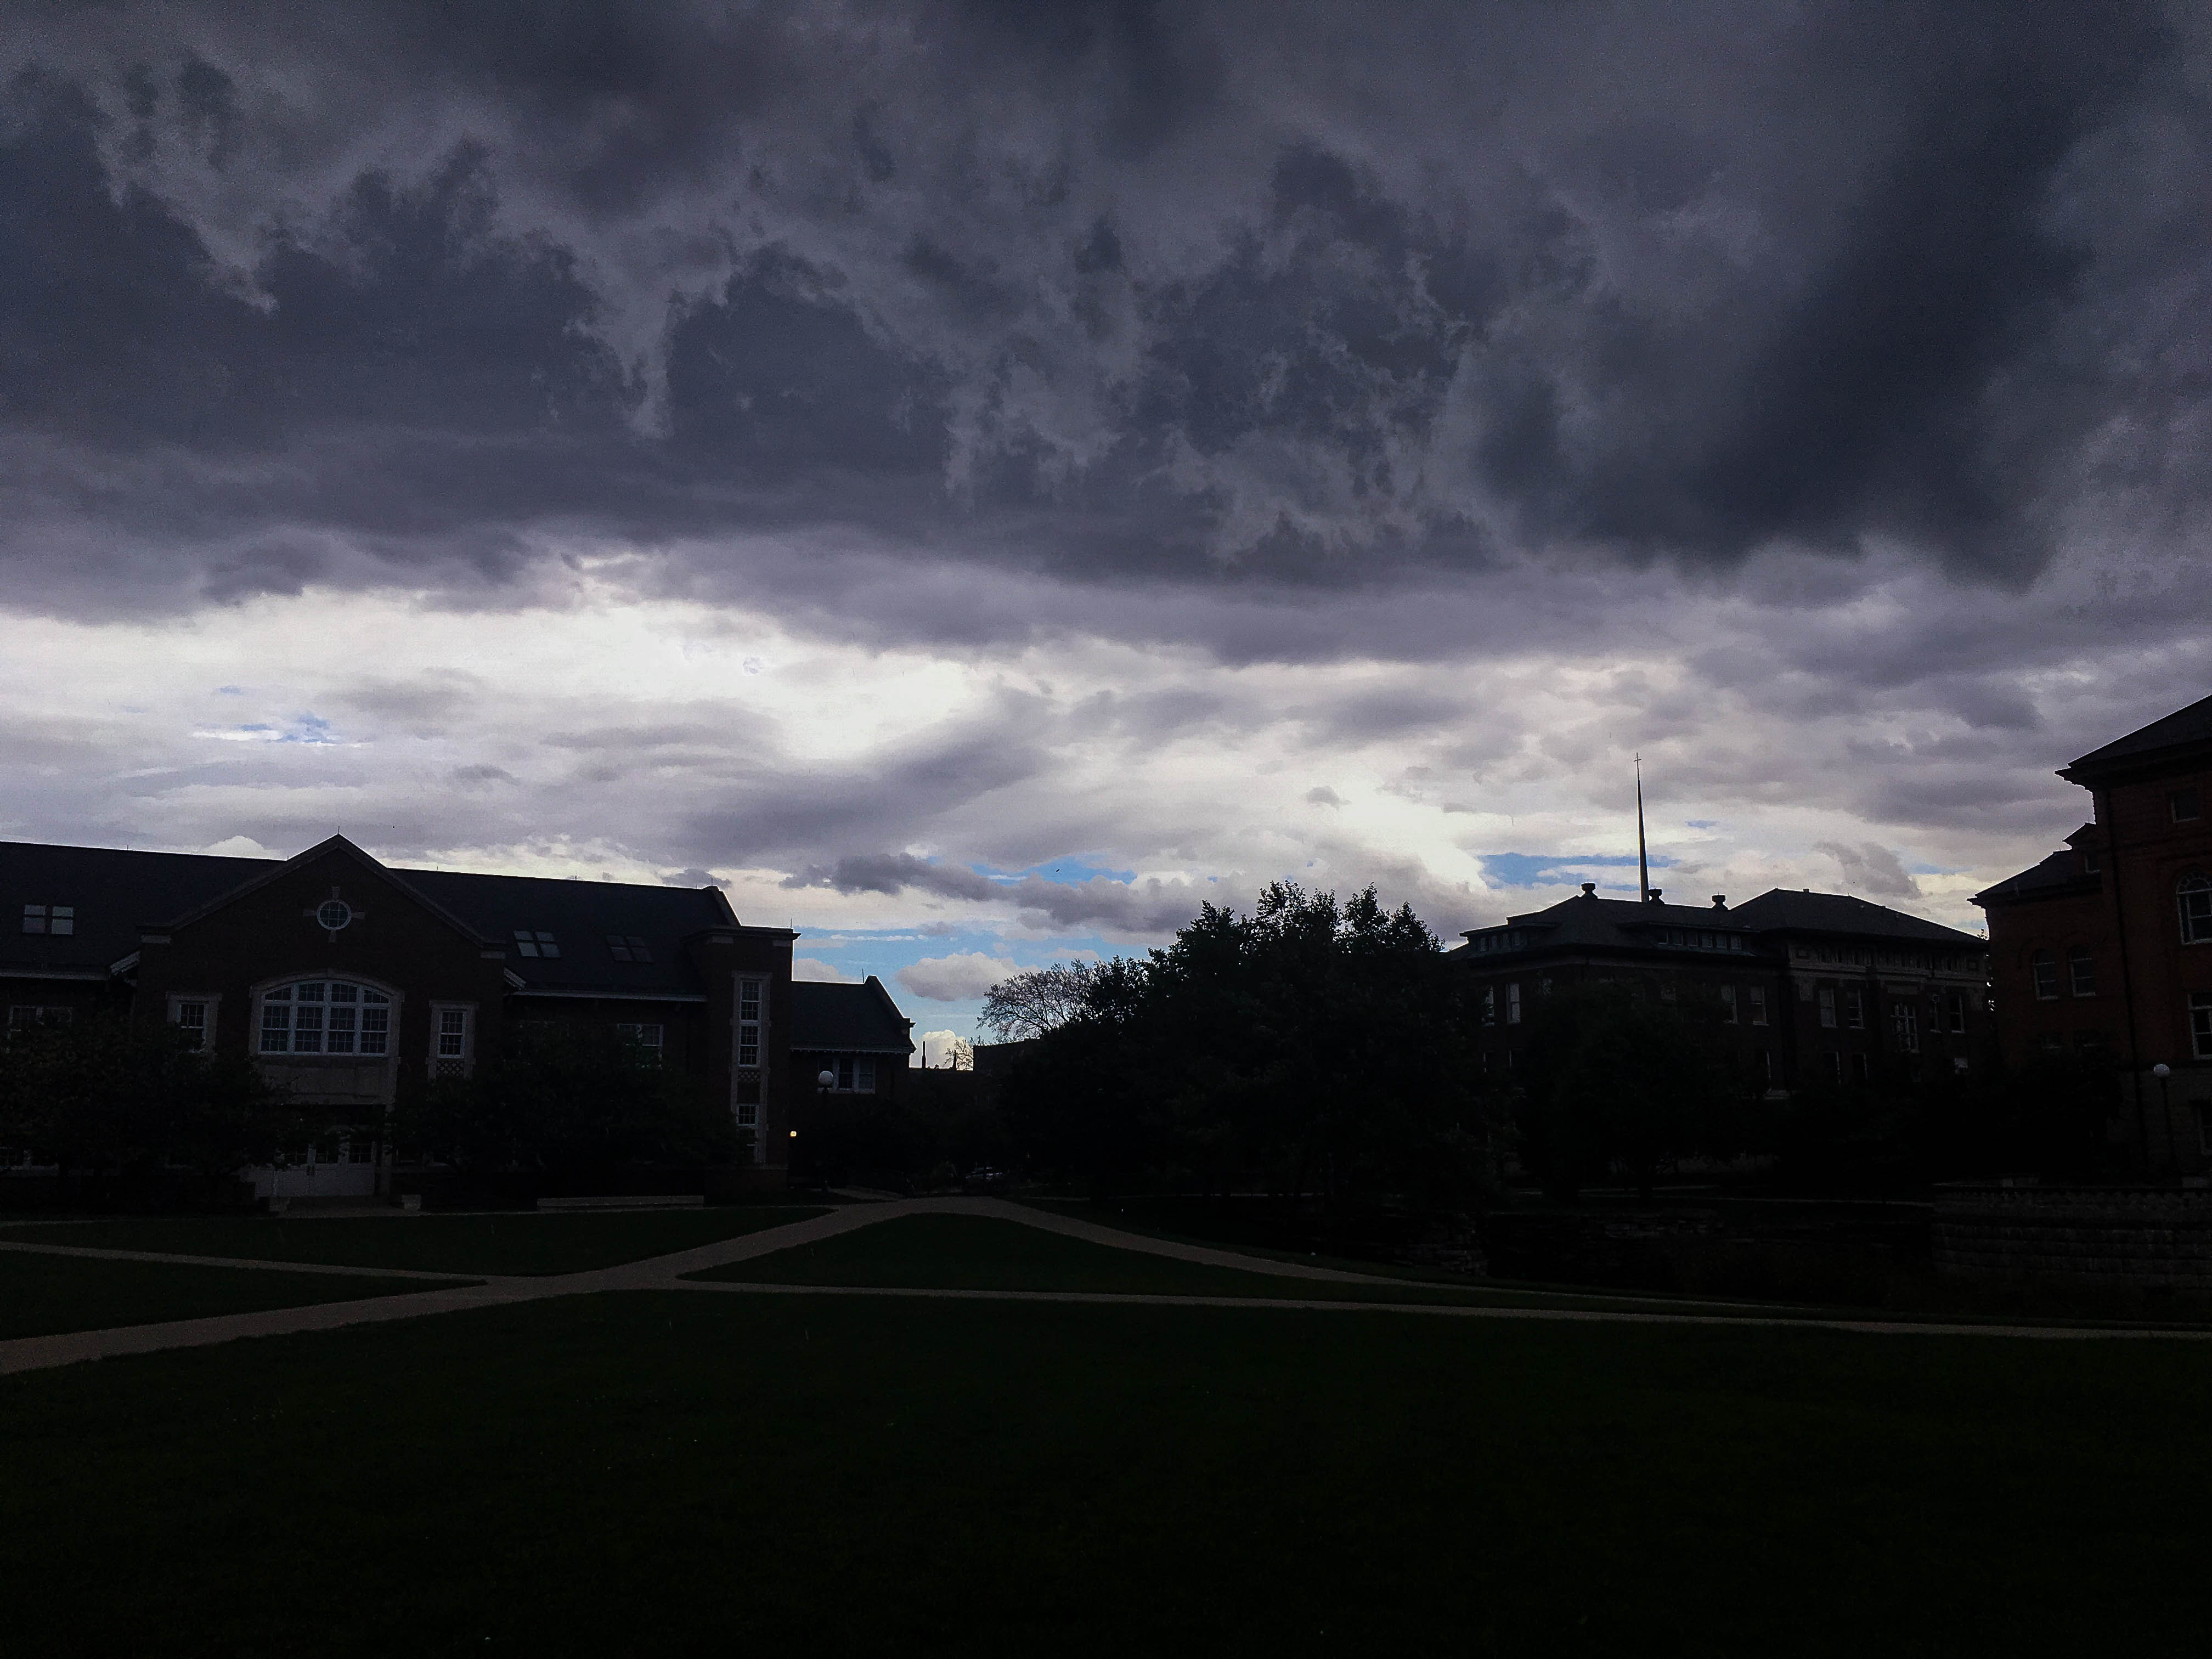 Storm coming in over the Engineering Quad.